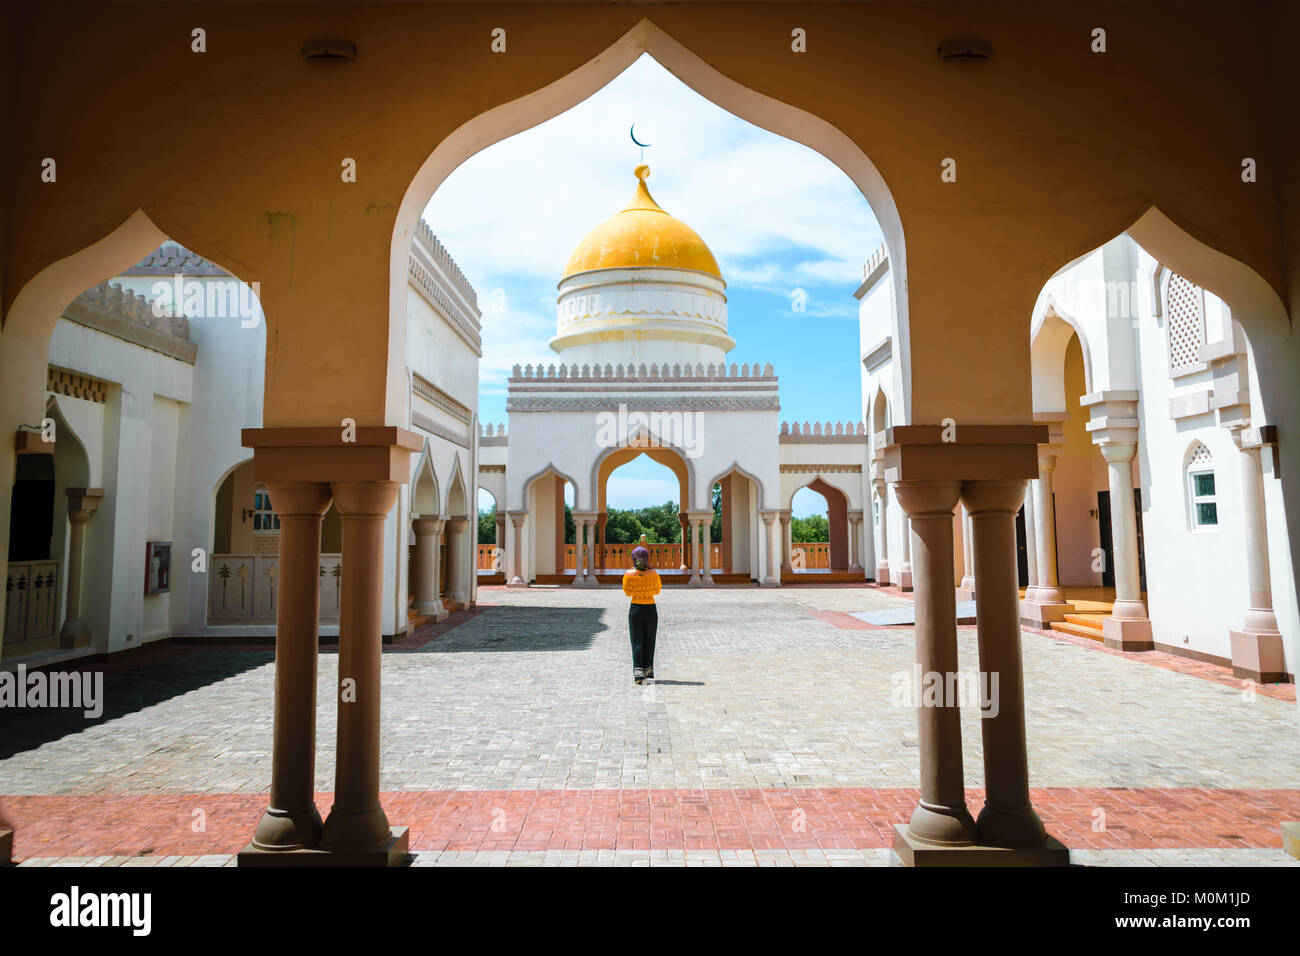 The Grand Mosque's architecture is one of the bests in the Philippines. Stock Photo